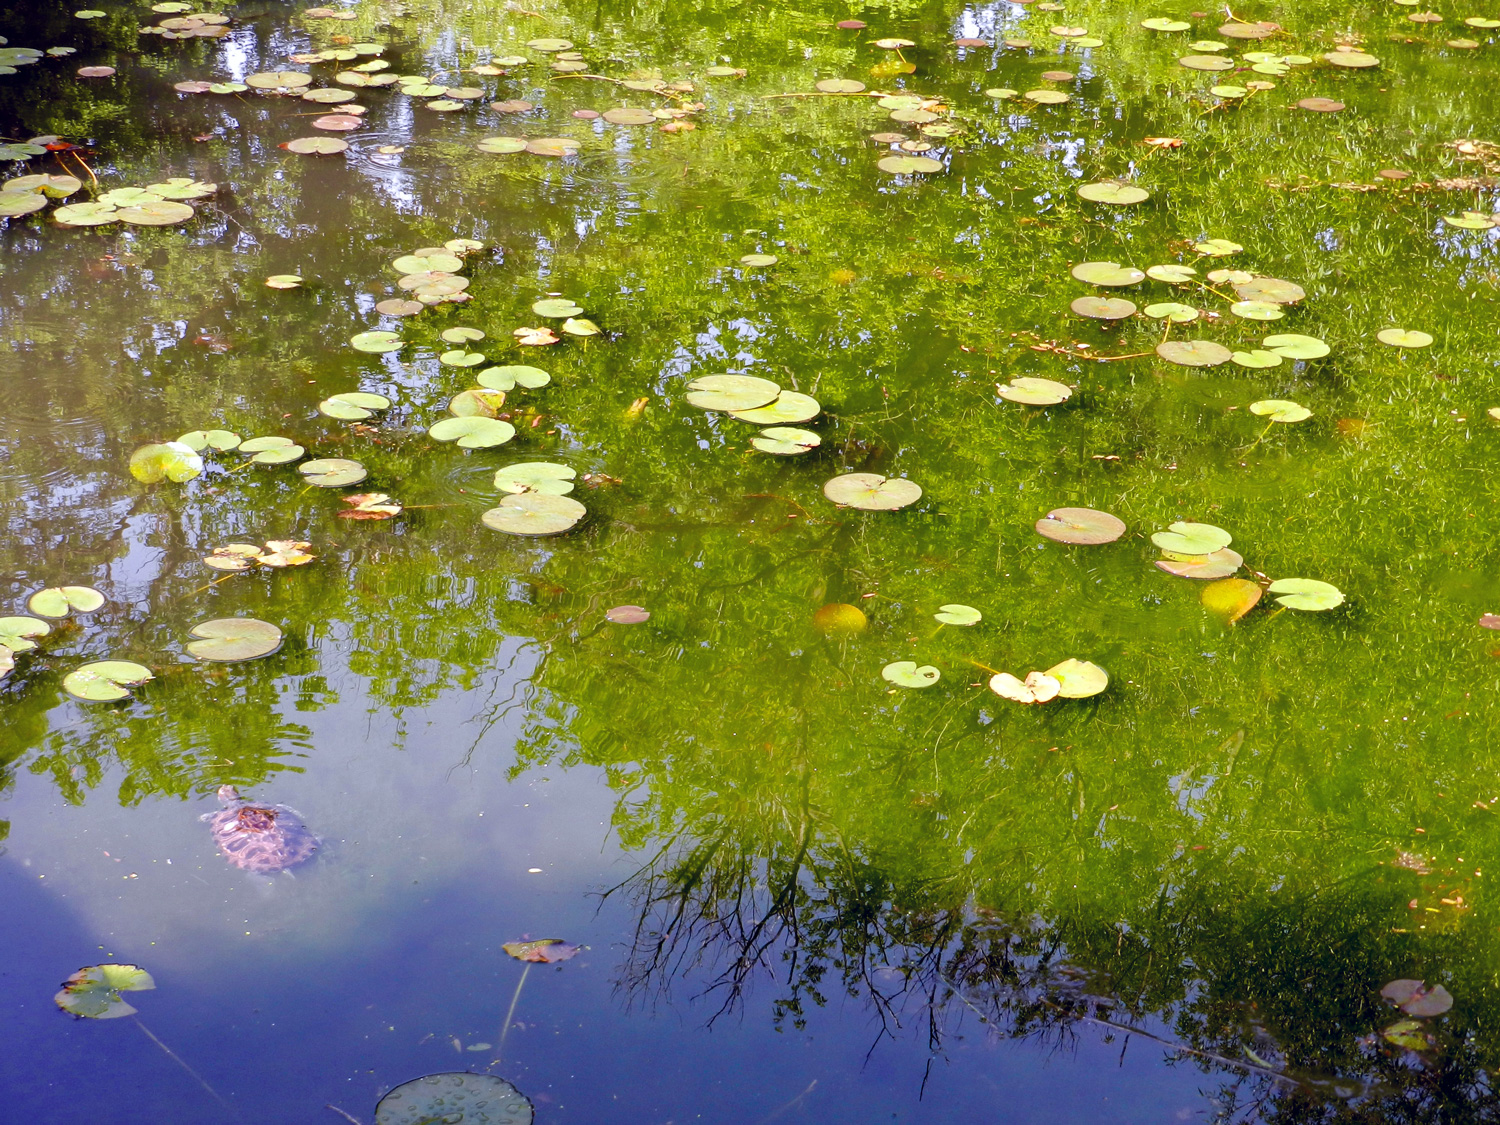 A turtle swims in a lily pond in spring.